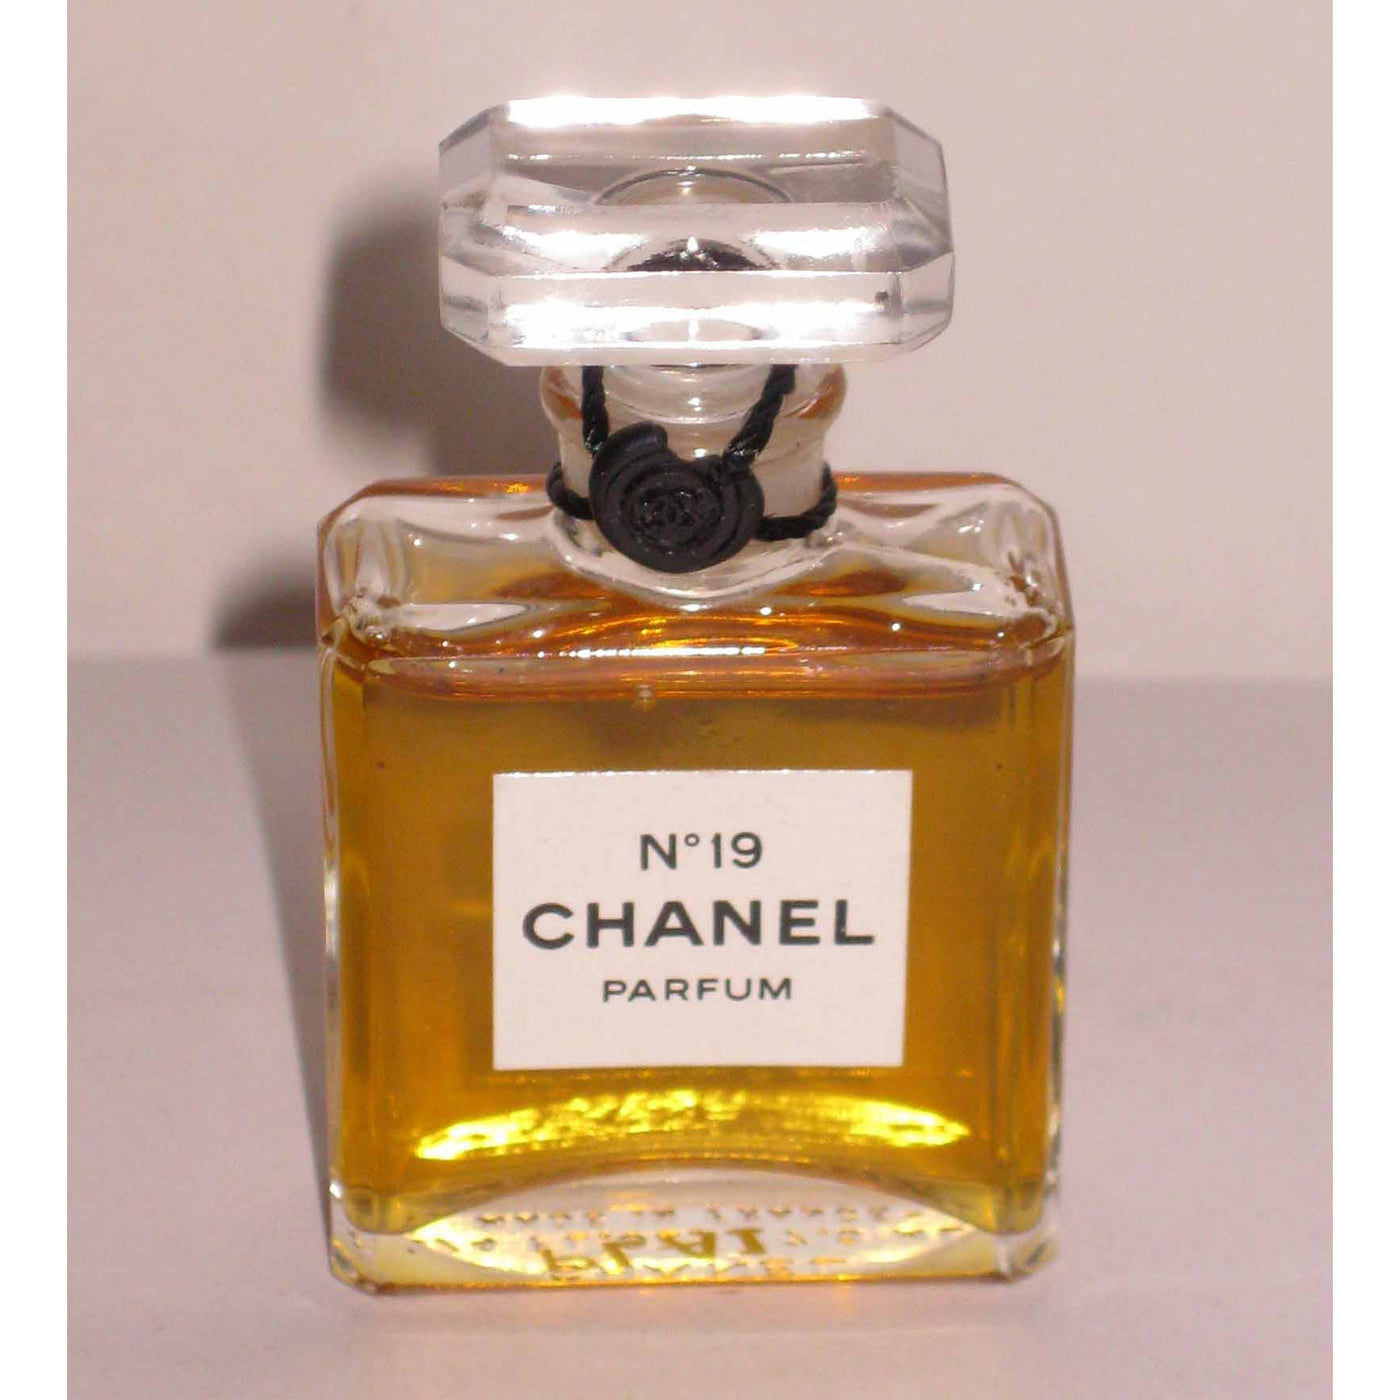 Chanel No 19 Parfum – Quirky Finds